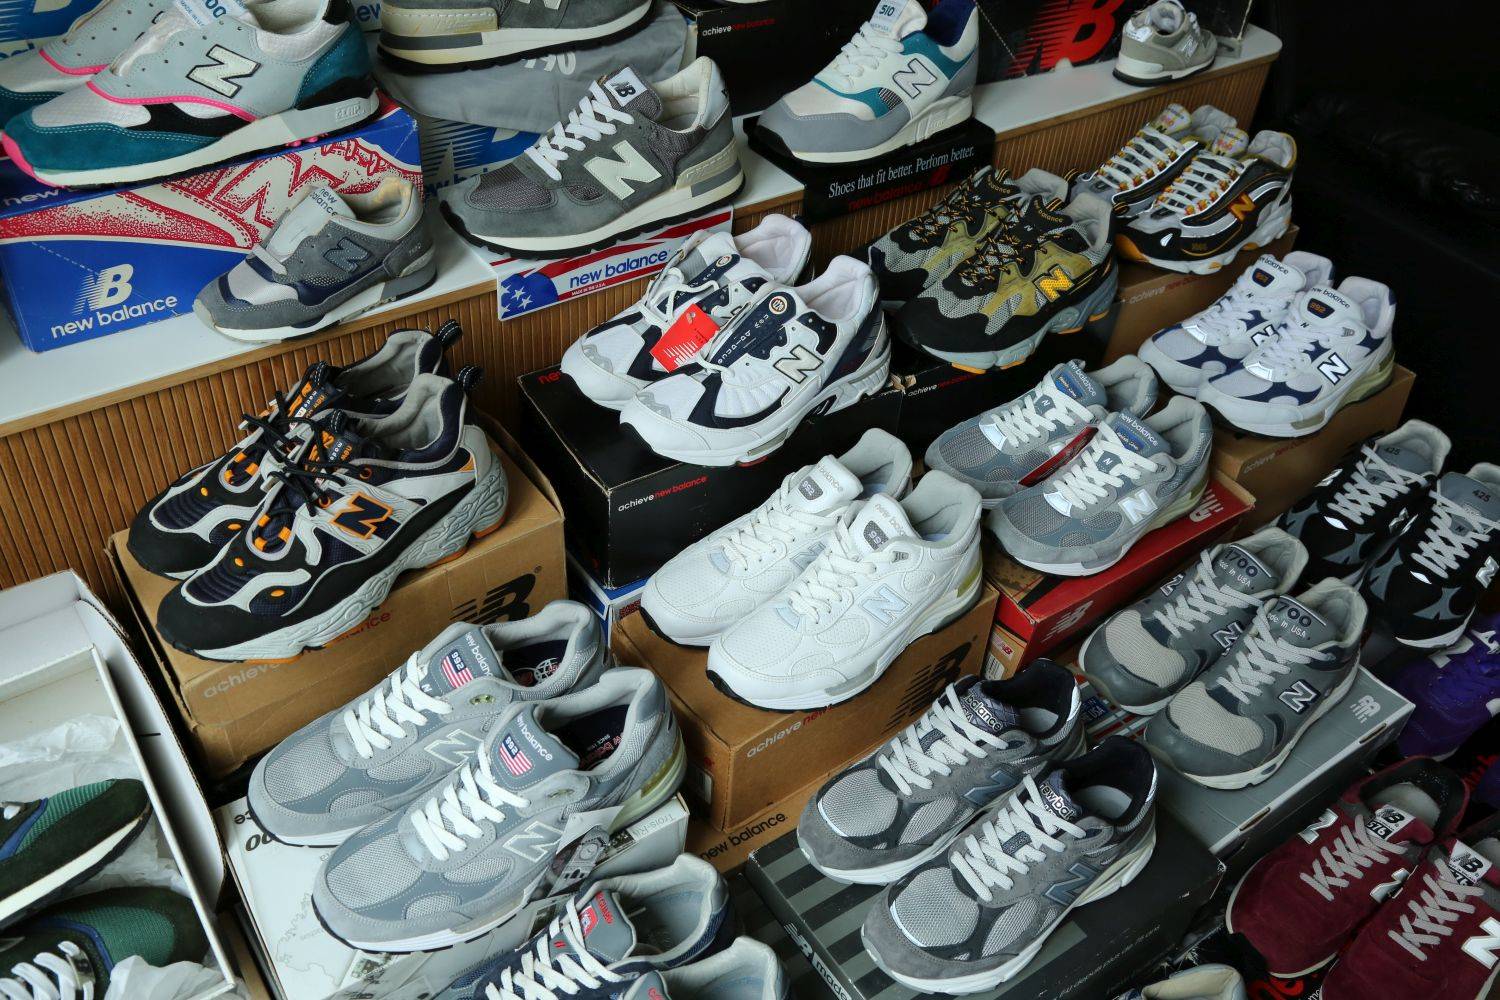 Thomas Dartiques' collection of new balance 3